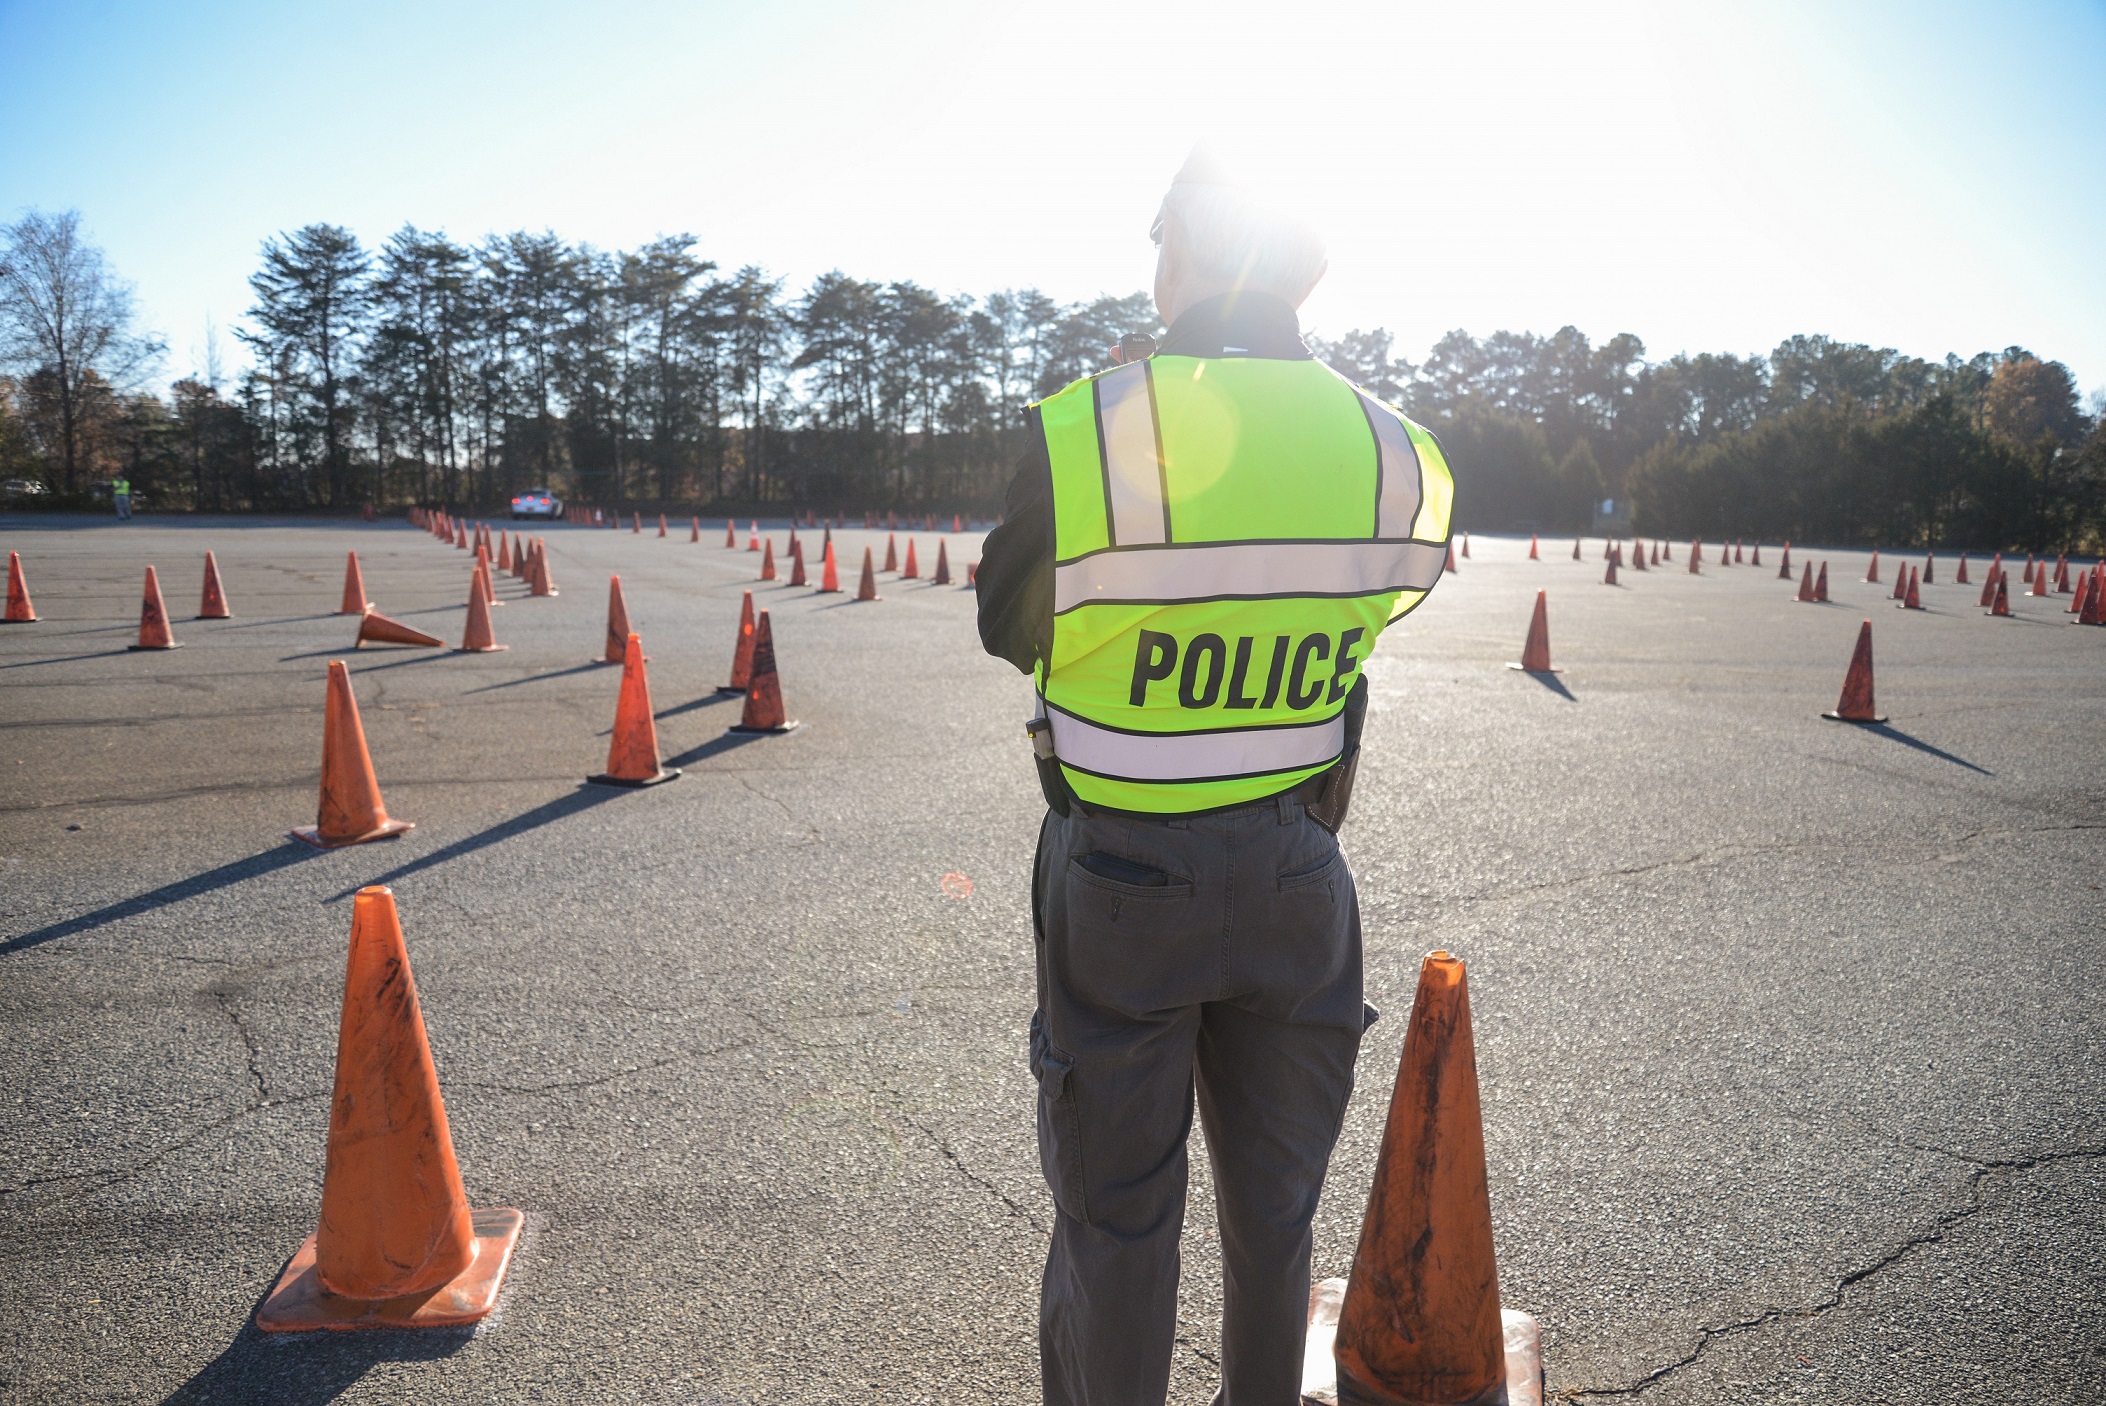 back of man with police vest standing in parking lot and orange cones throughout parking lot